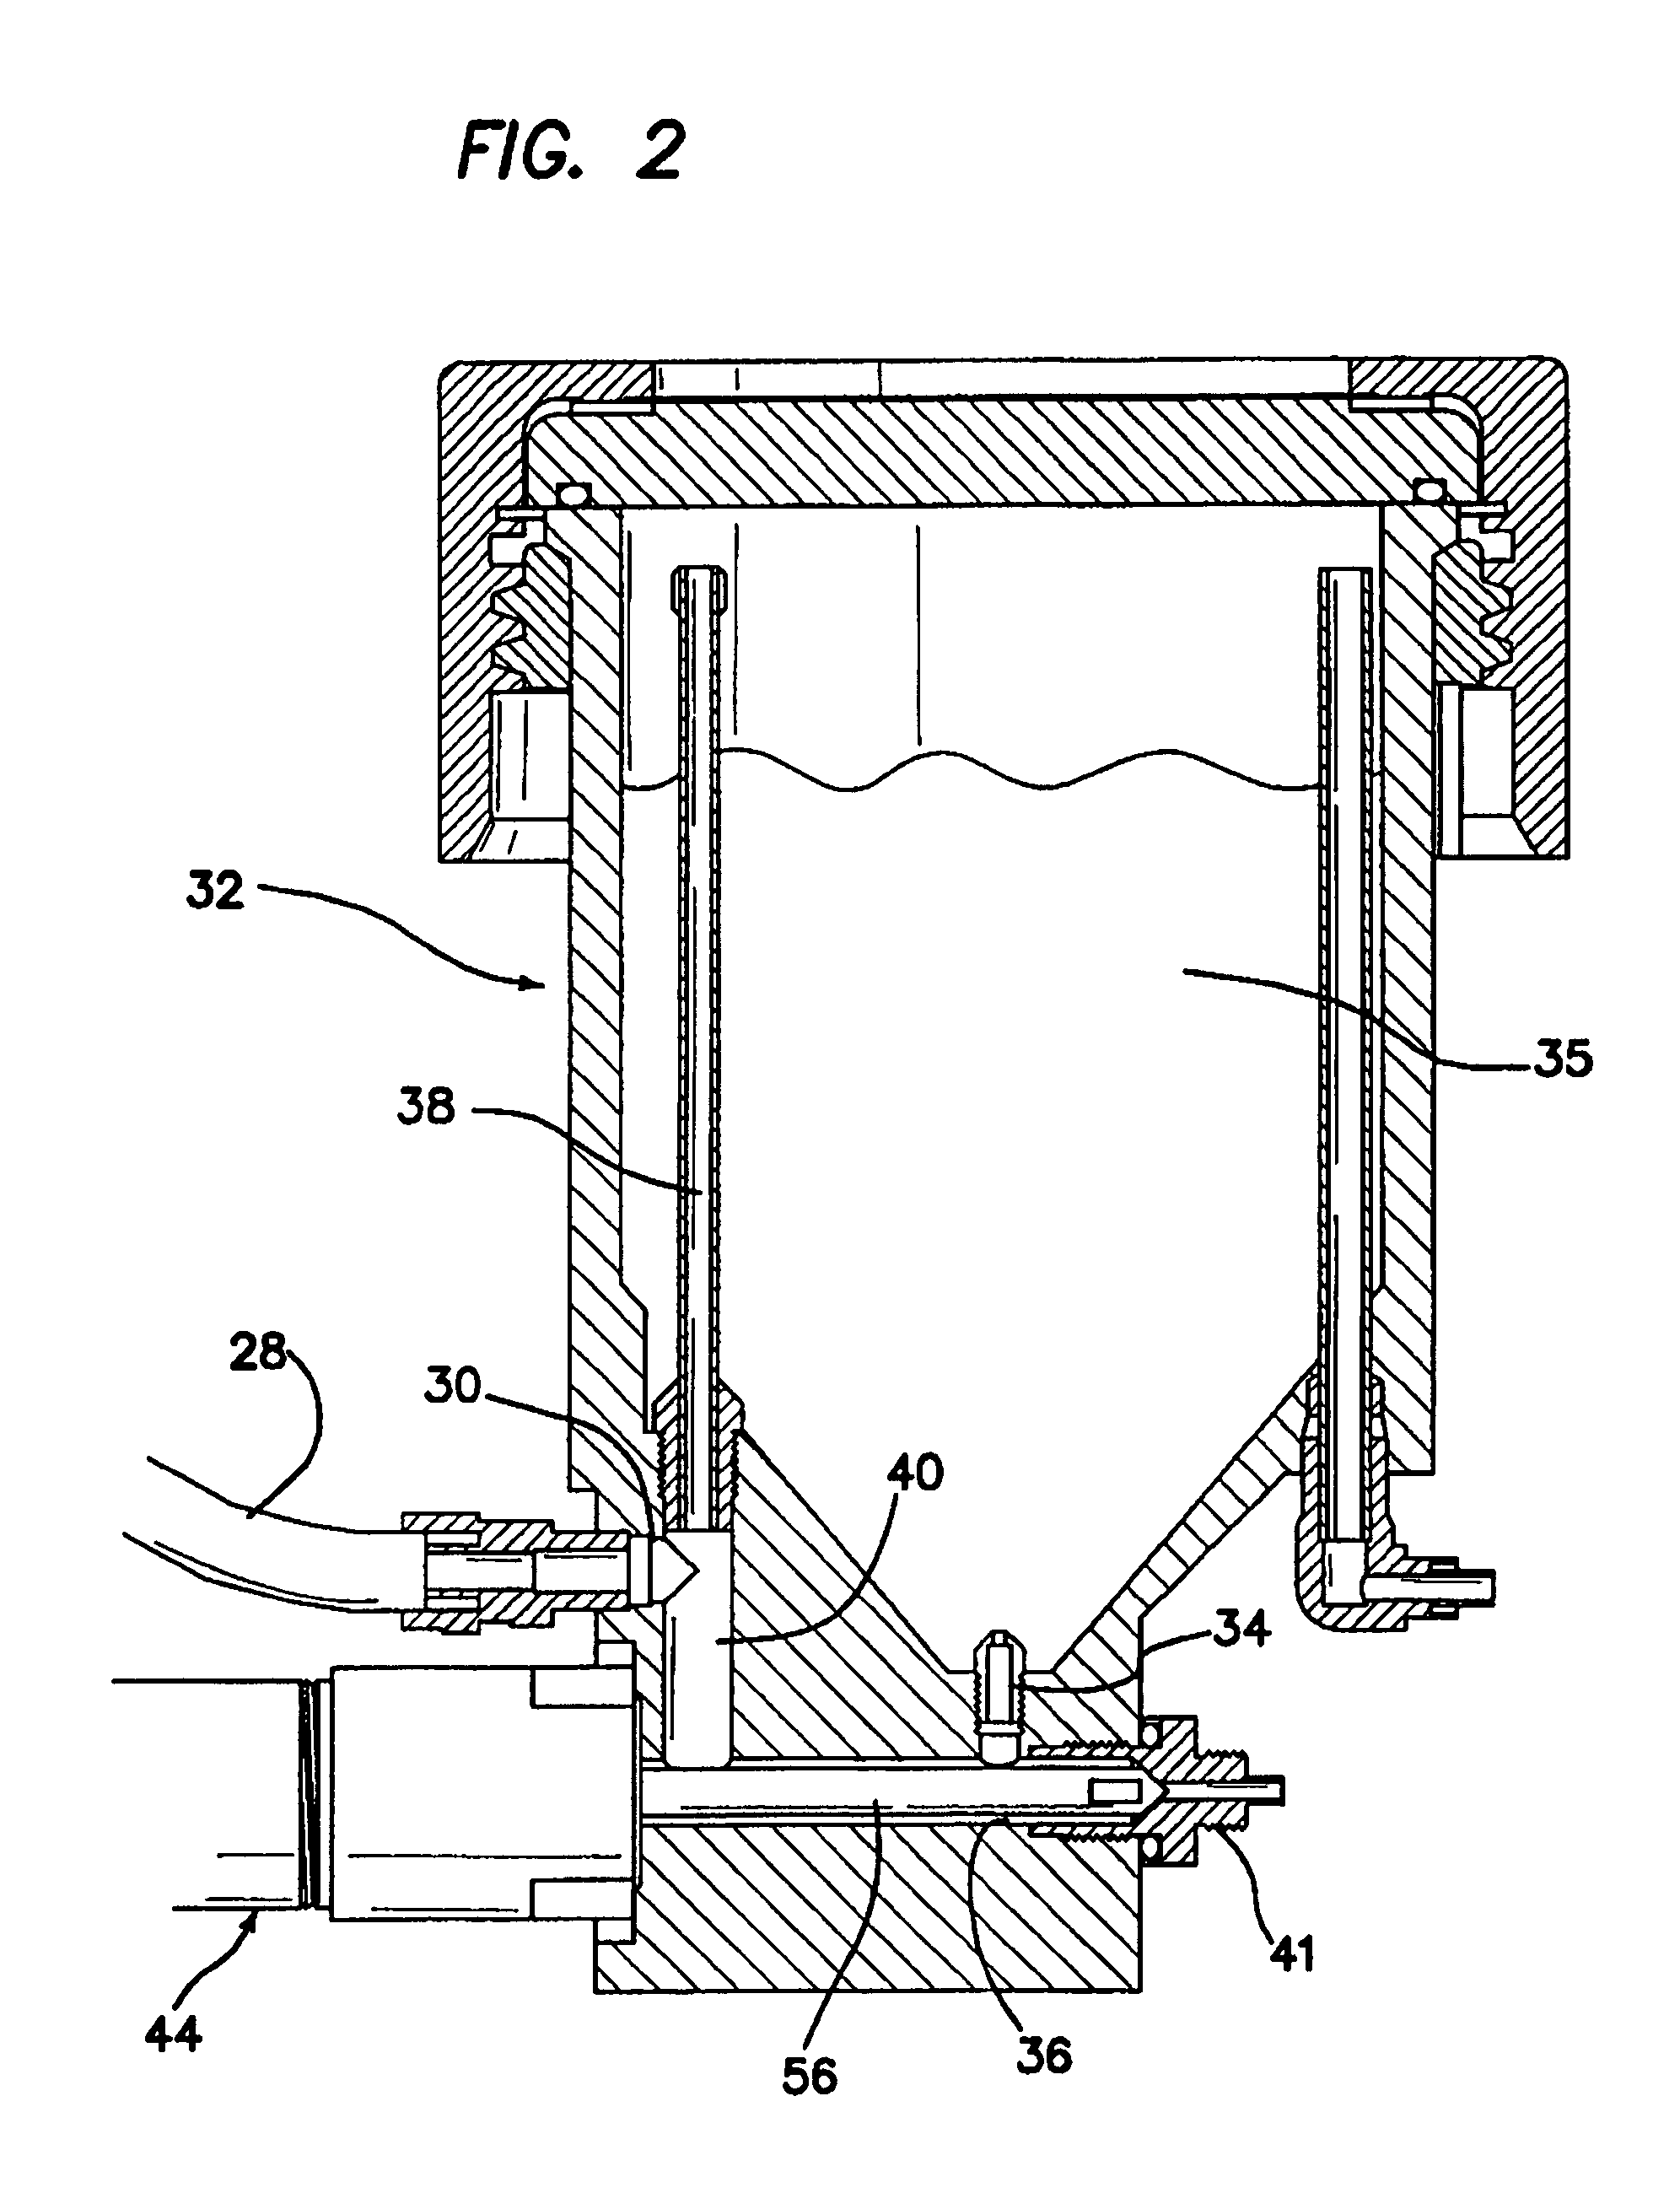 Tool for using a particulate media/fluid mixture